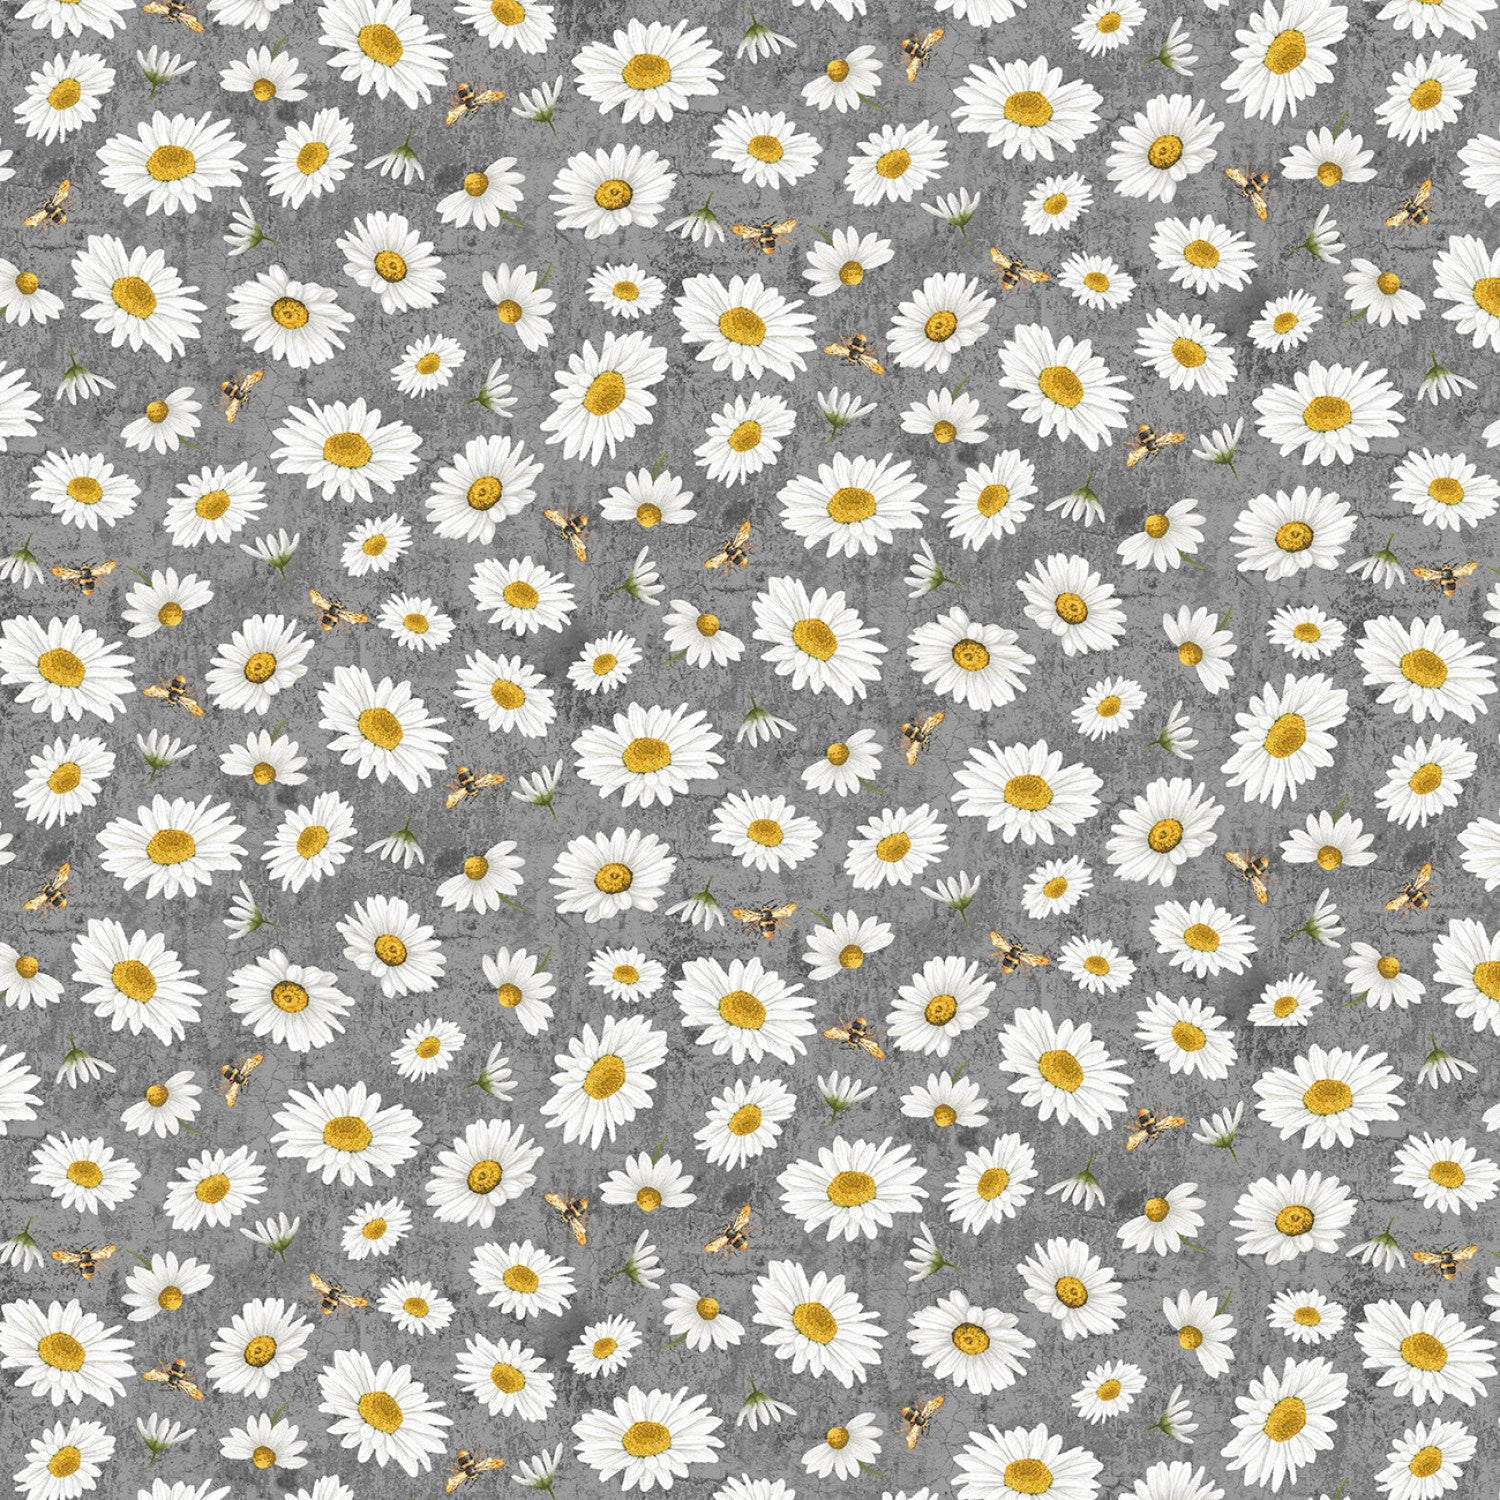 Timeless Treasures Fabric FQ (approximately 18" x 22") Tossed Bee and Daisy Florals Cotton Quilting Fabric (Slate), Honey Bee Farm